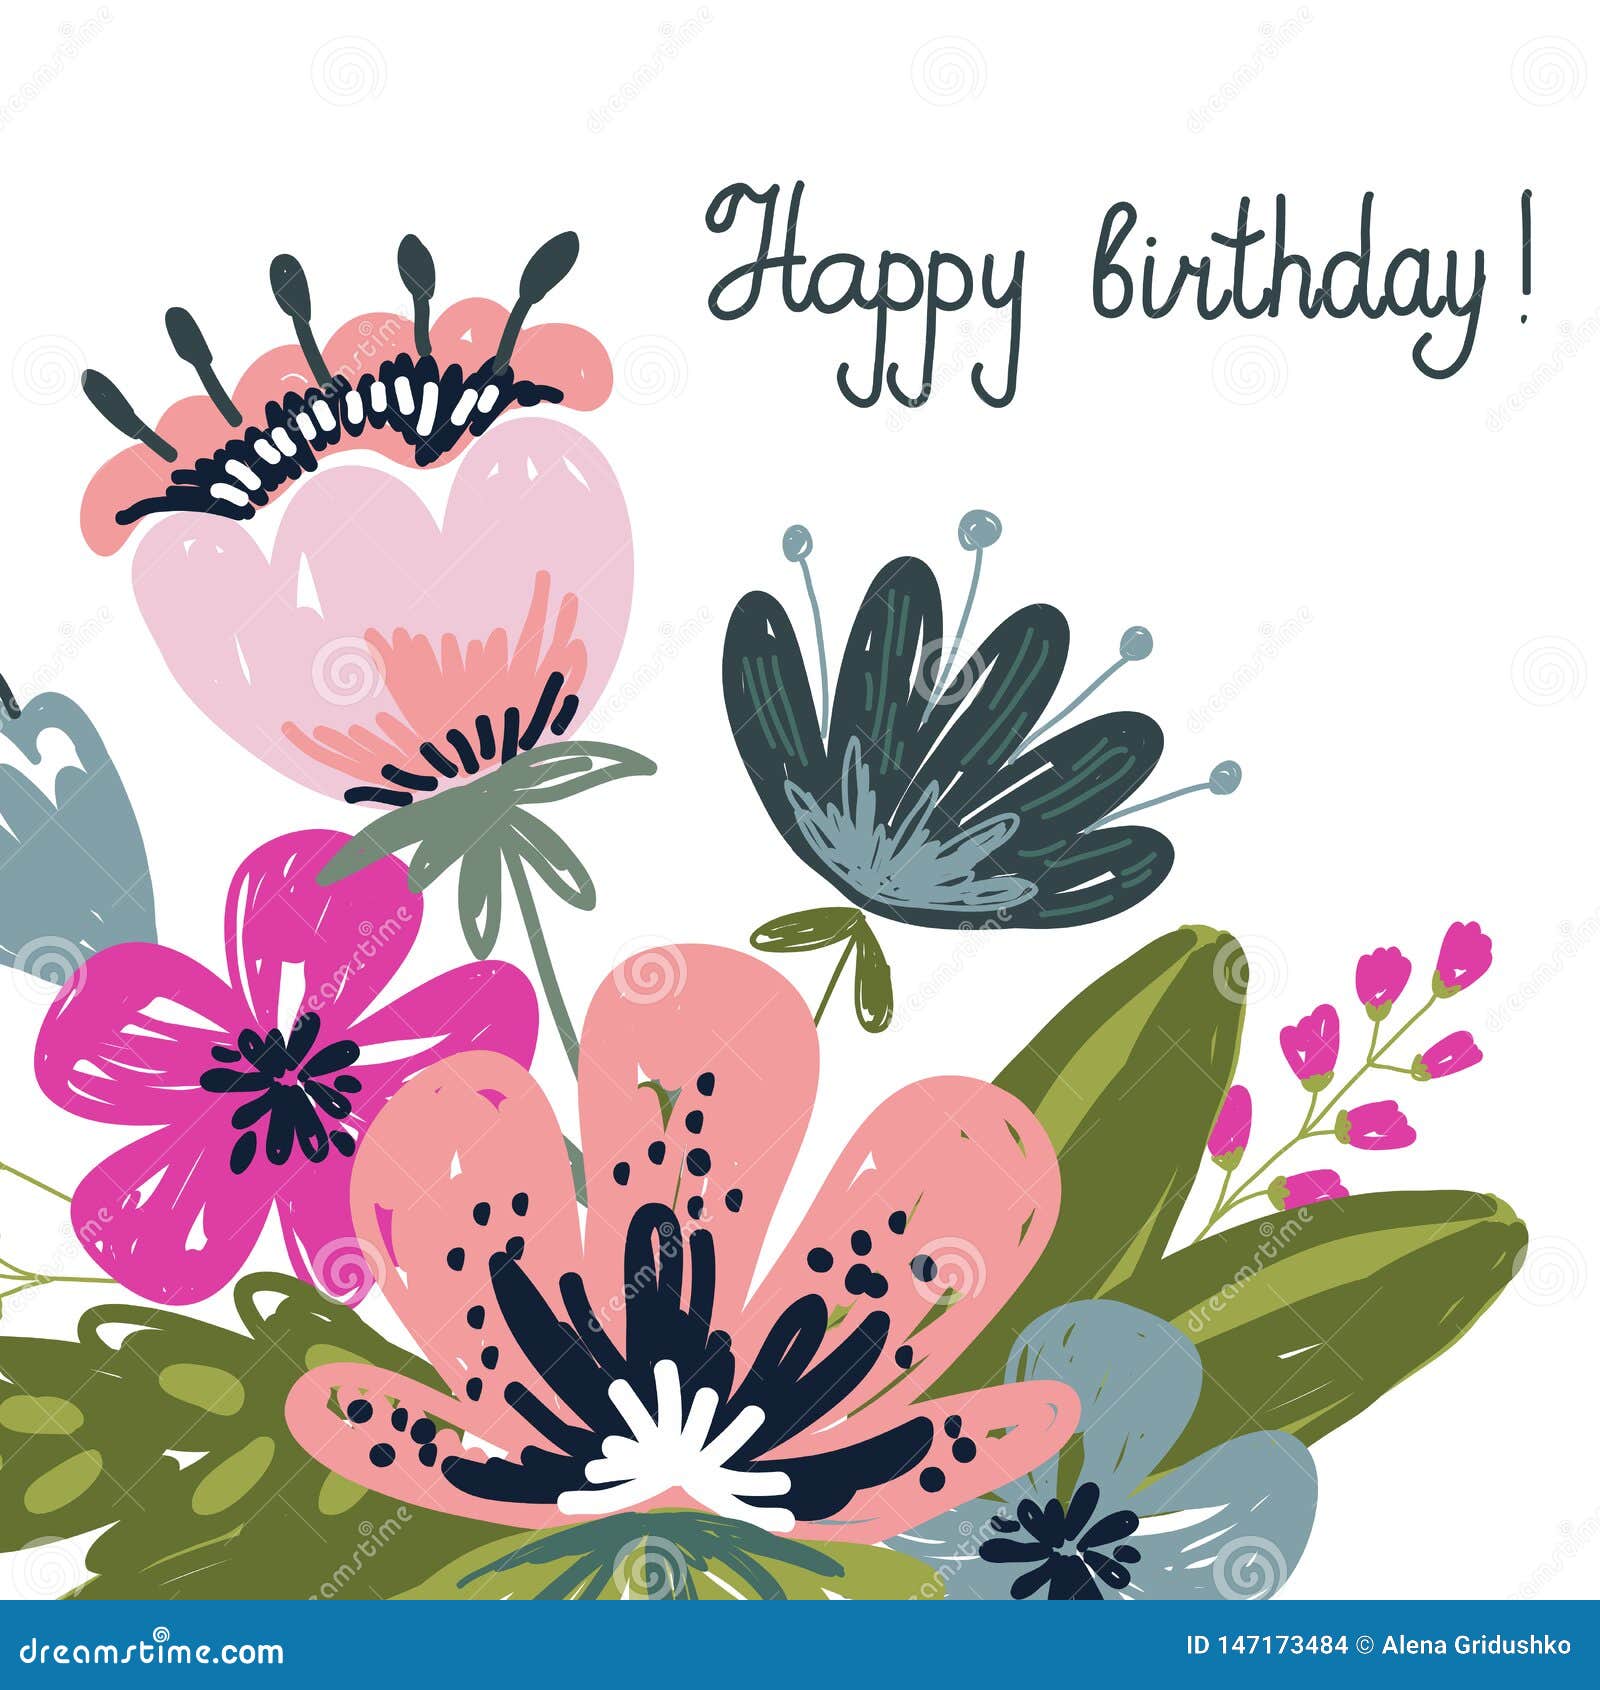 Greeting Card Happy Birthday. Hand Drawng Brush Picture Stock Vector ...